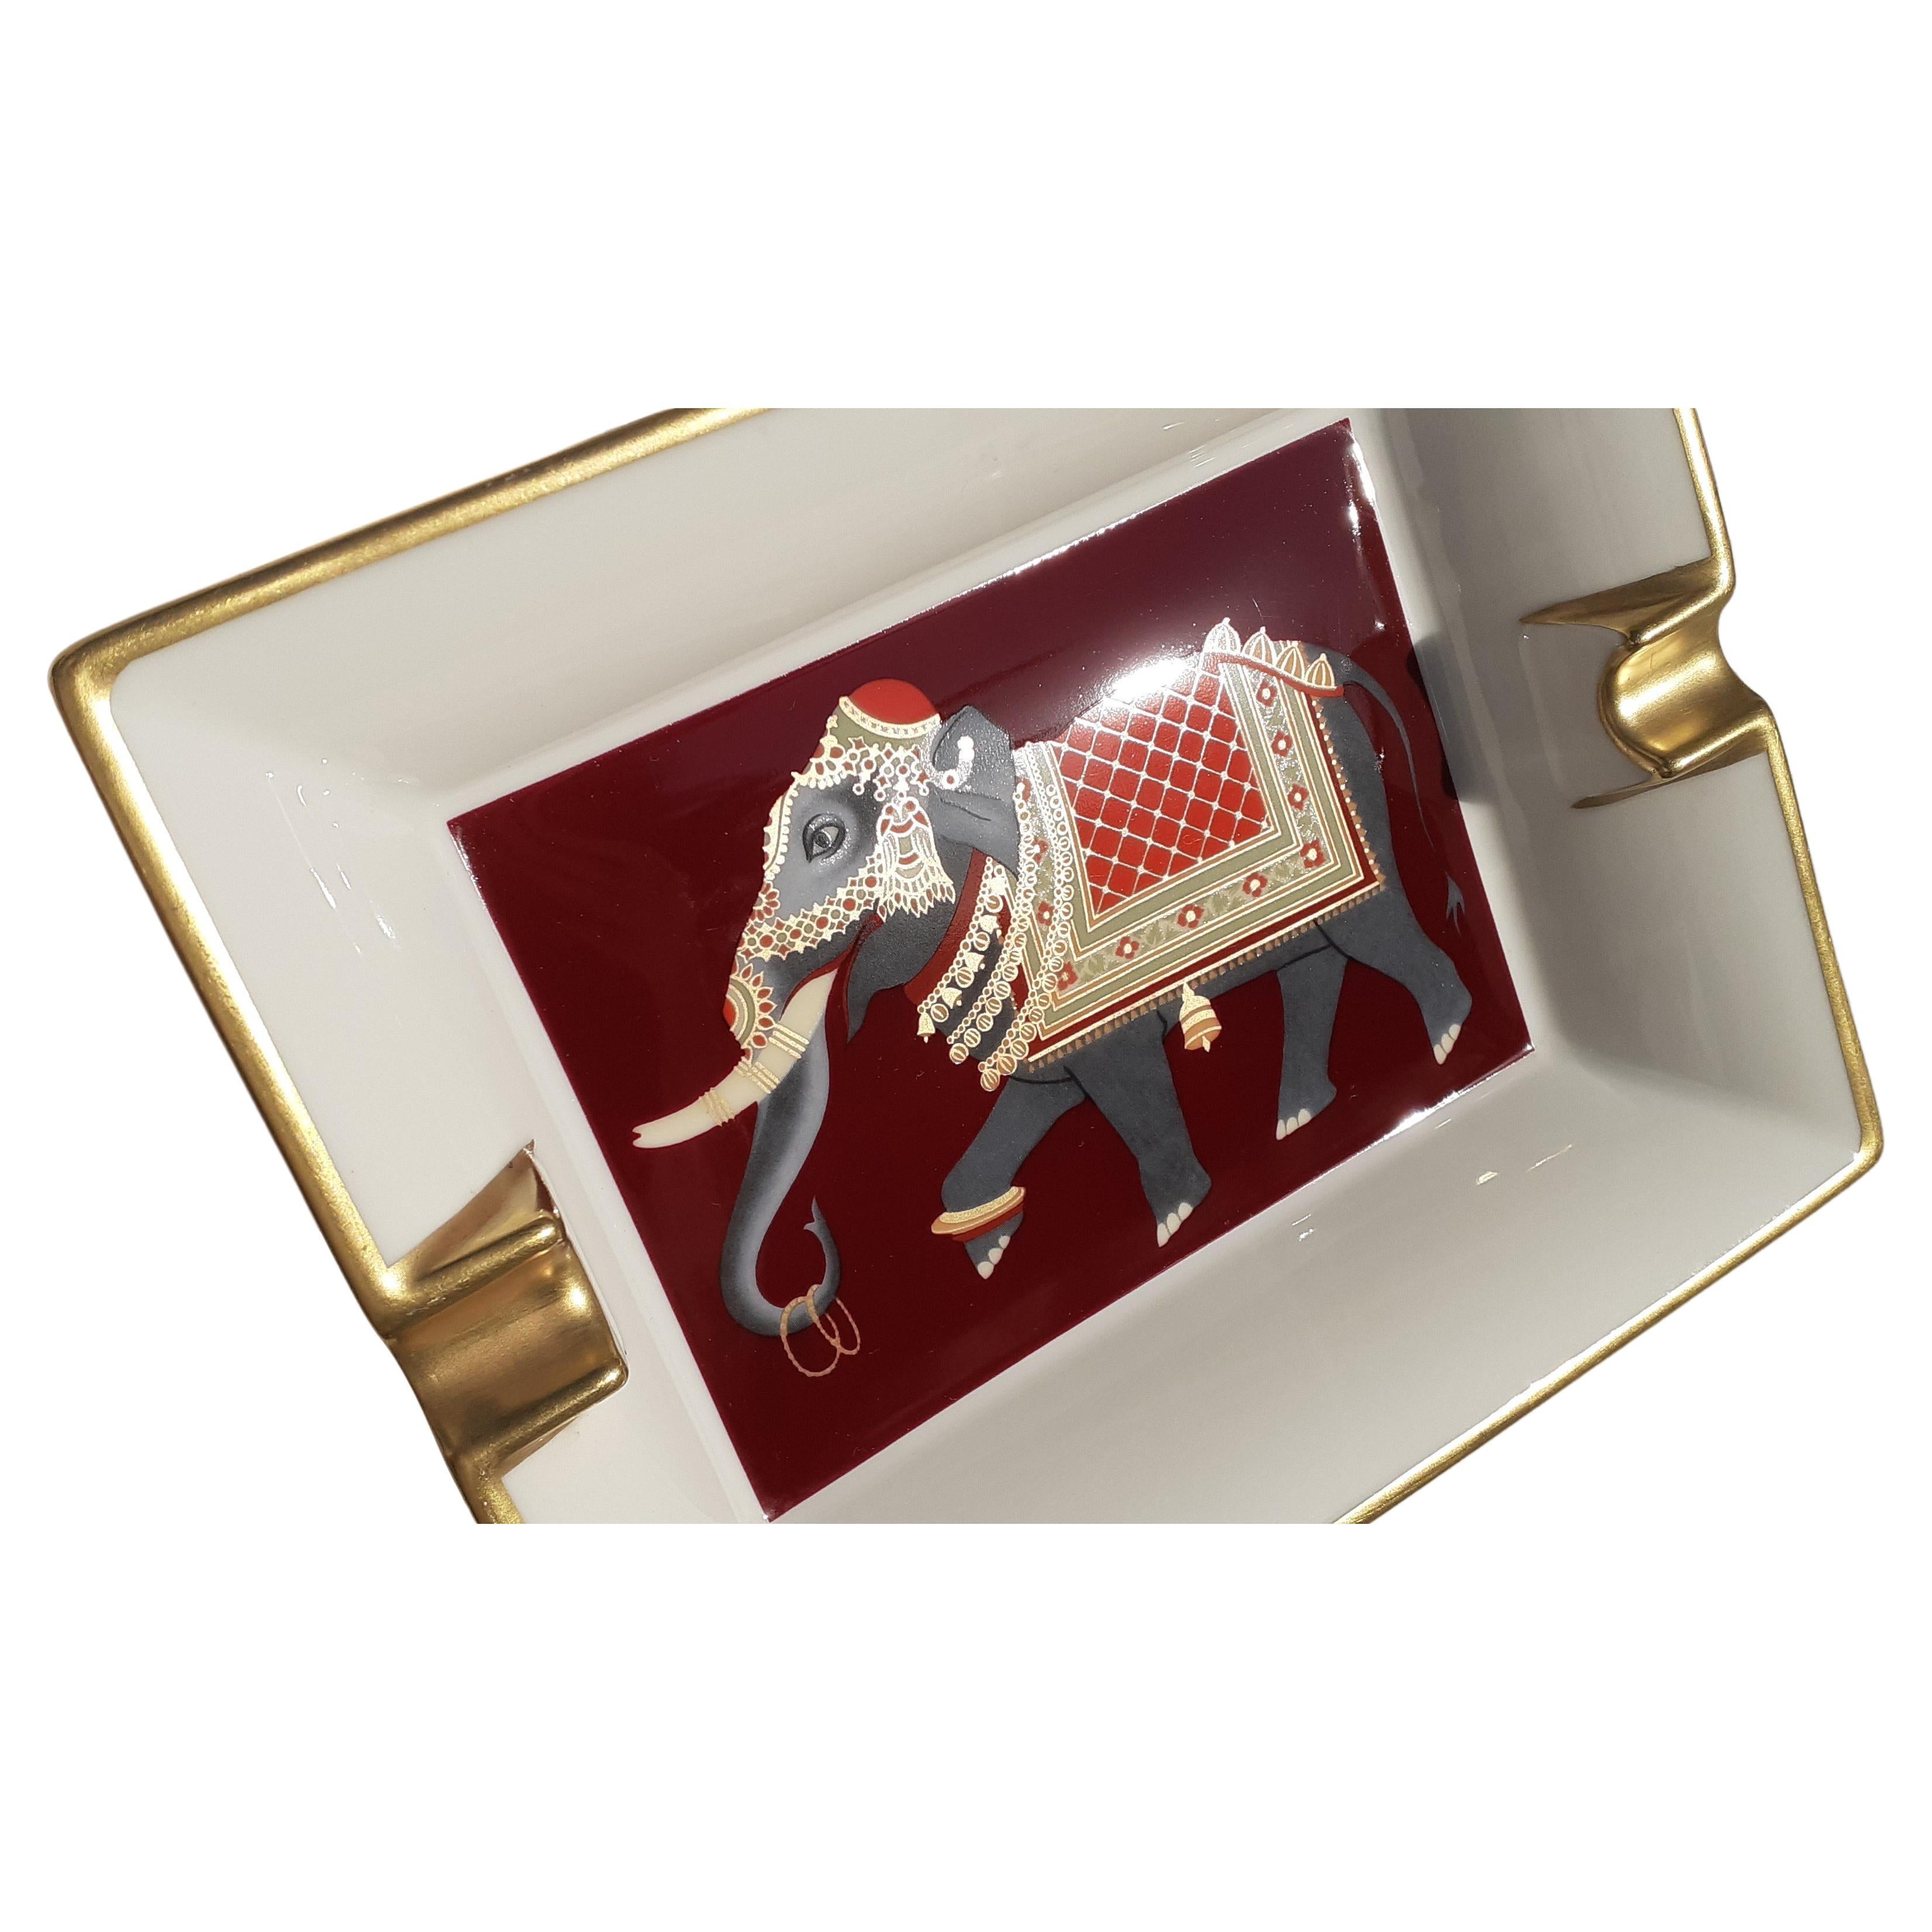 Absolutely Gorgeous Authentic Hermès Ashtray

Pattern: Elephant dressed in his finery

Made in France

Vintage item

Made of  french limoges porcelain and golden edges

Colorways: White / Burgundy / Orange / Grey / Golden

The jewels and other